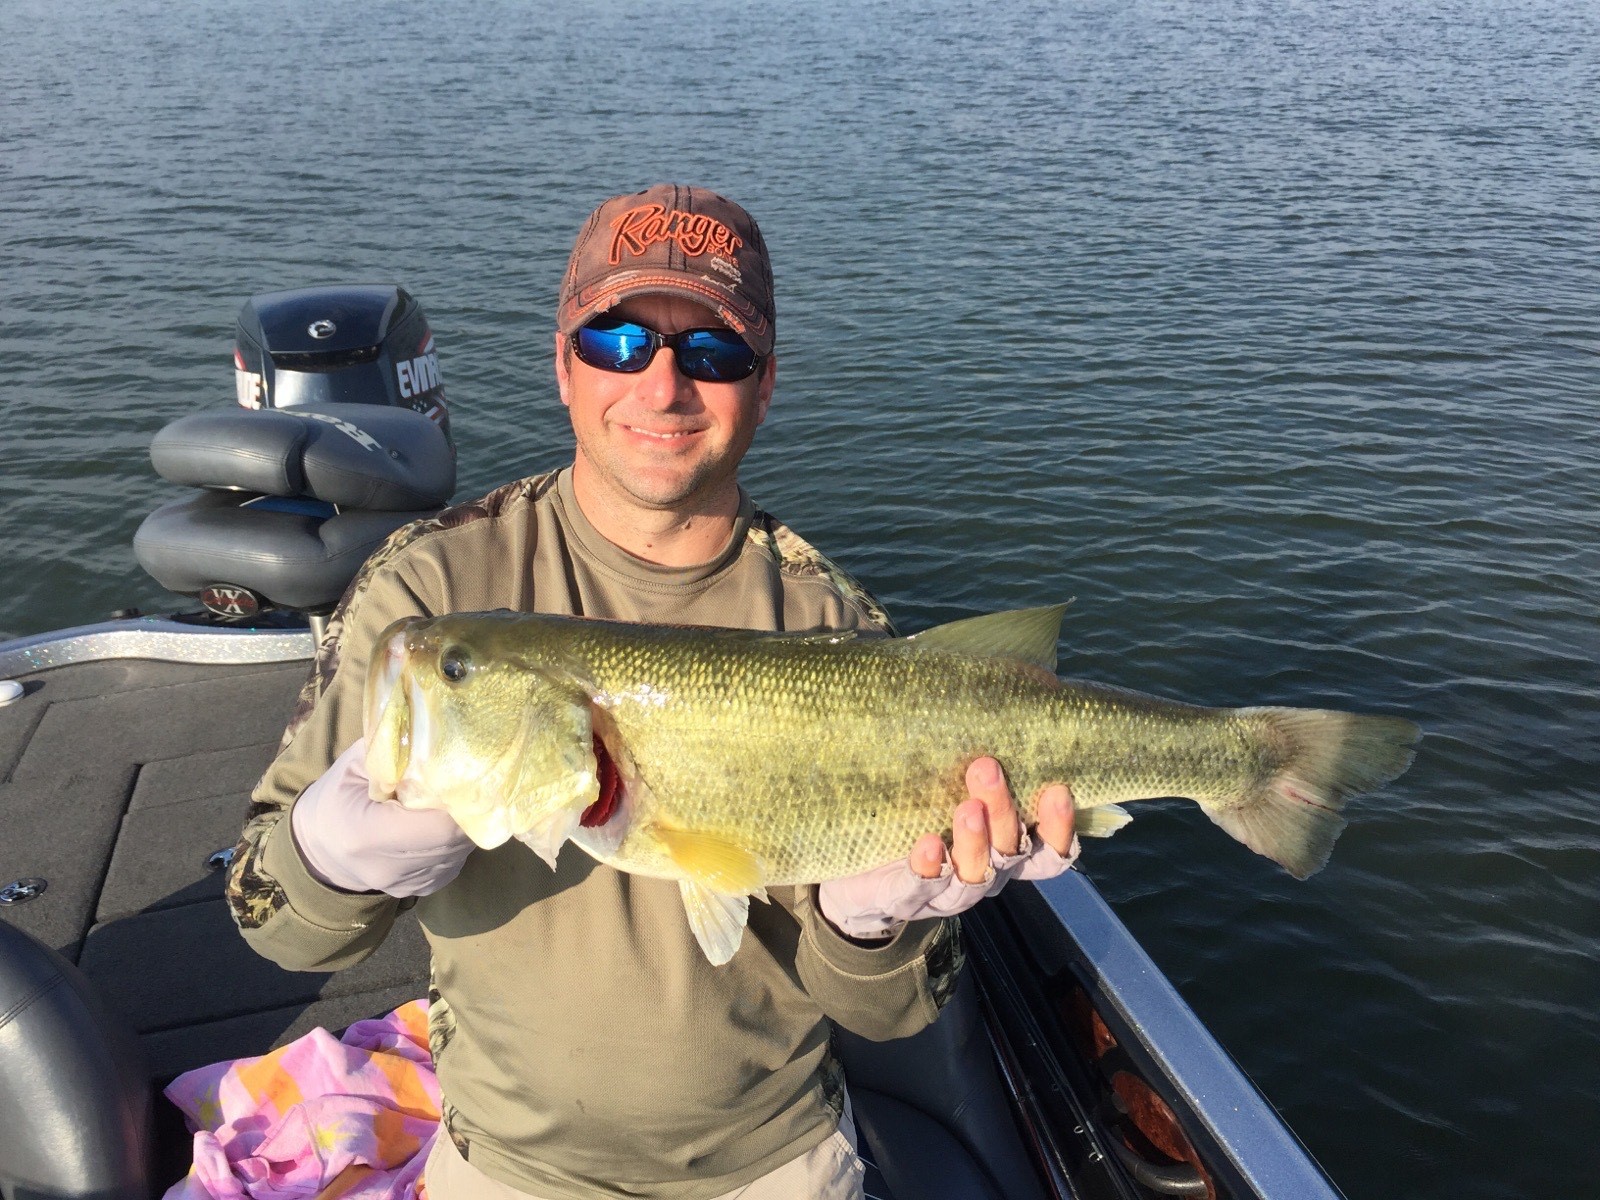 Ryan Oster holds a nice largemouth bass caught from Kentucky Lake